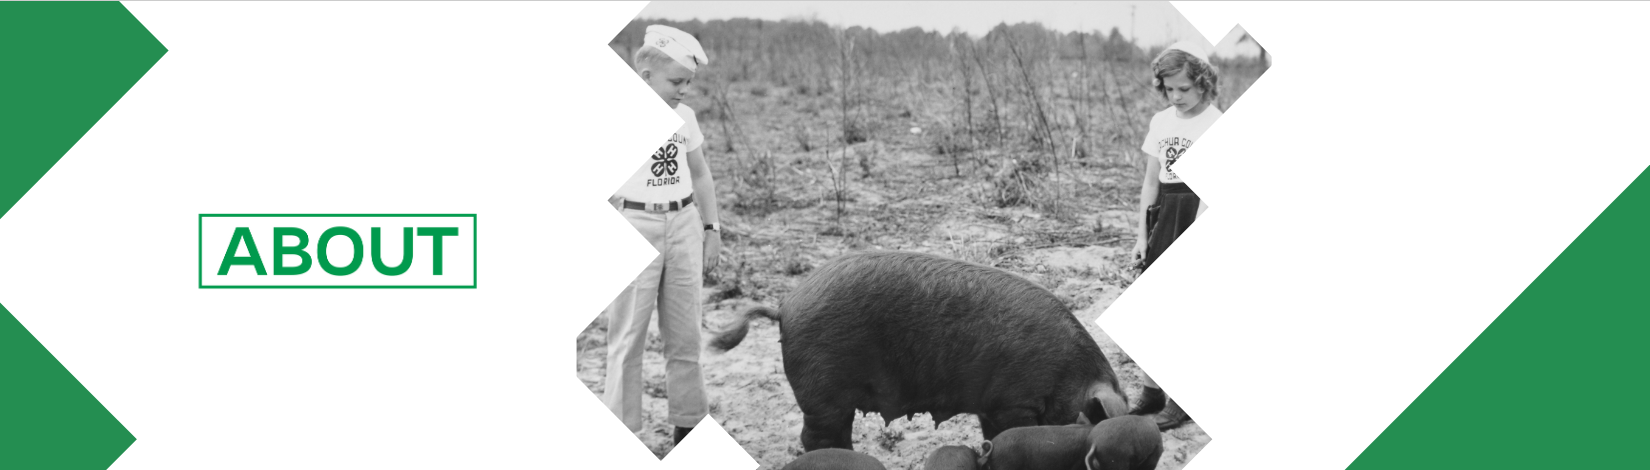 Two Florida 4H kids in a field with pigs.